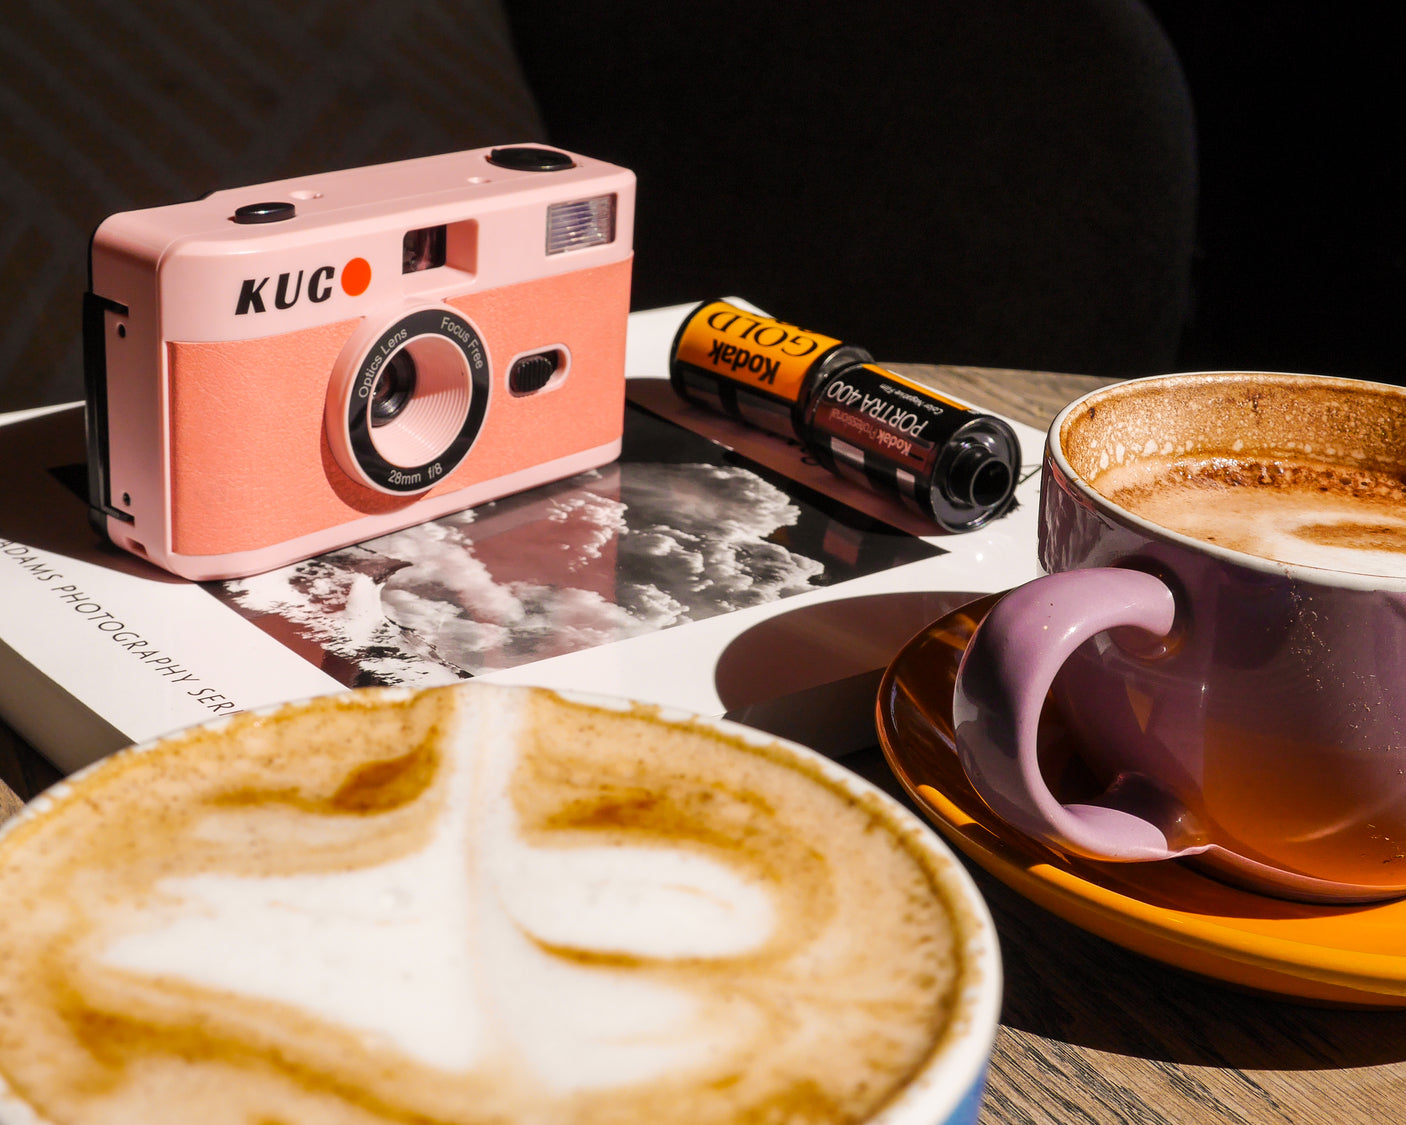 Brand New KUGO 35mm Film Camera Reusable Point And Shoot - Pink. Film camera store.